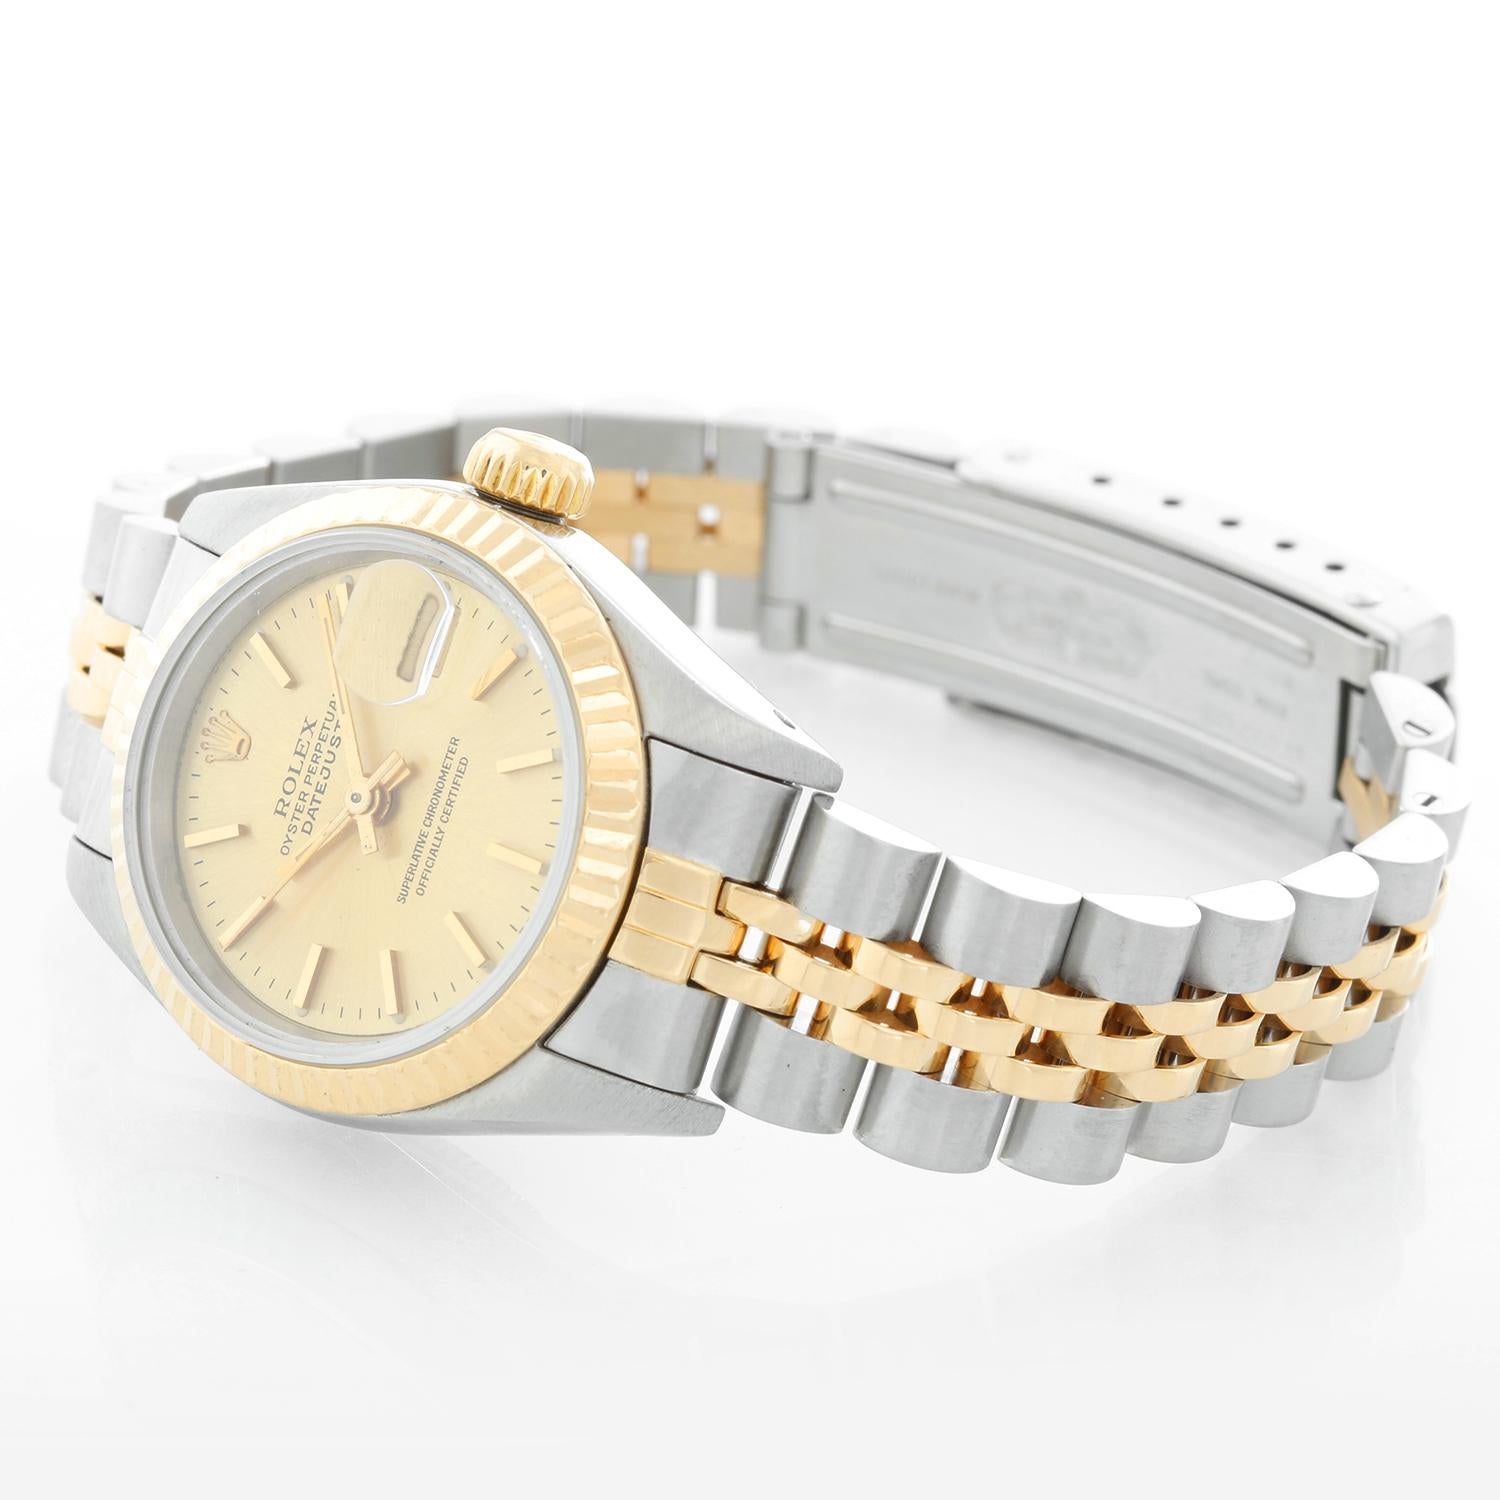 Rolex  2-Tone Datejust Steel & Gold Ladies Watch 69173 - Automatic winding, 29 jewels, Quickset date, sapphire crystal. Stainless steel case with 18k yellow gold fluted bezel . Champagne dial with gold stick markers. Stainless steel and 18k yellow